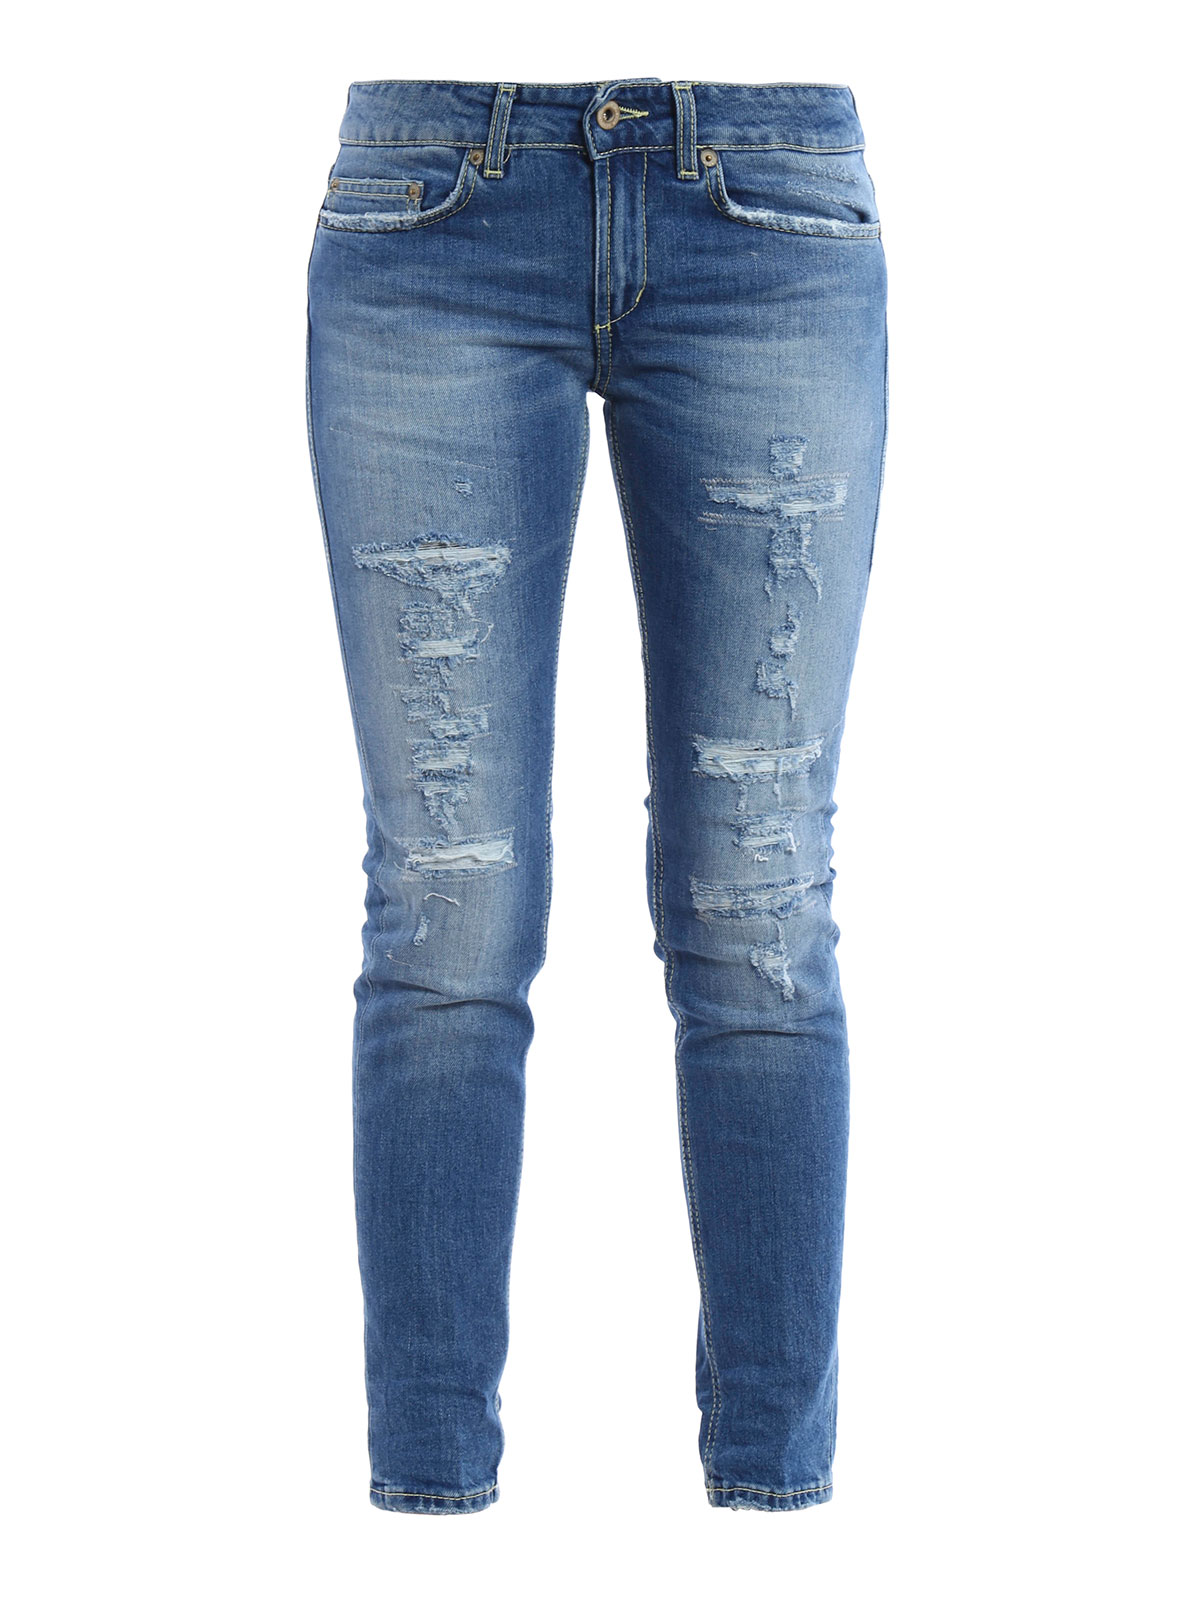 Skinny jeans Dondup - Ripped and faded jeans - P692DS133DM31800